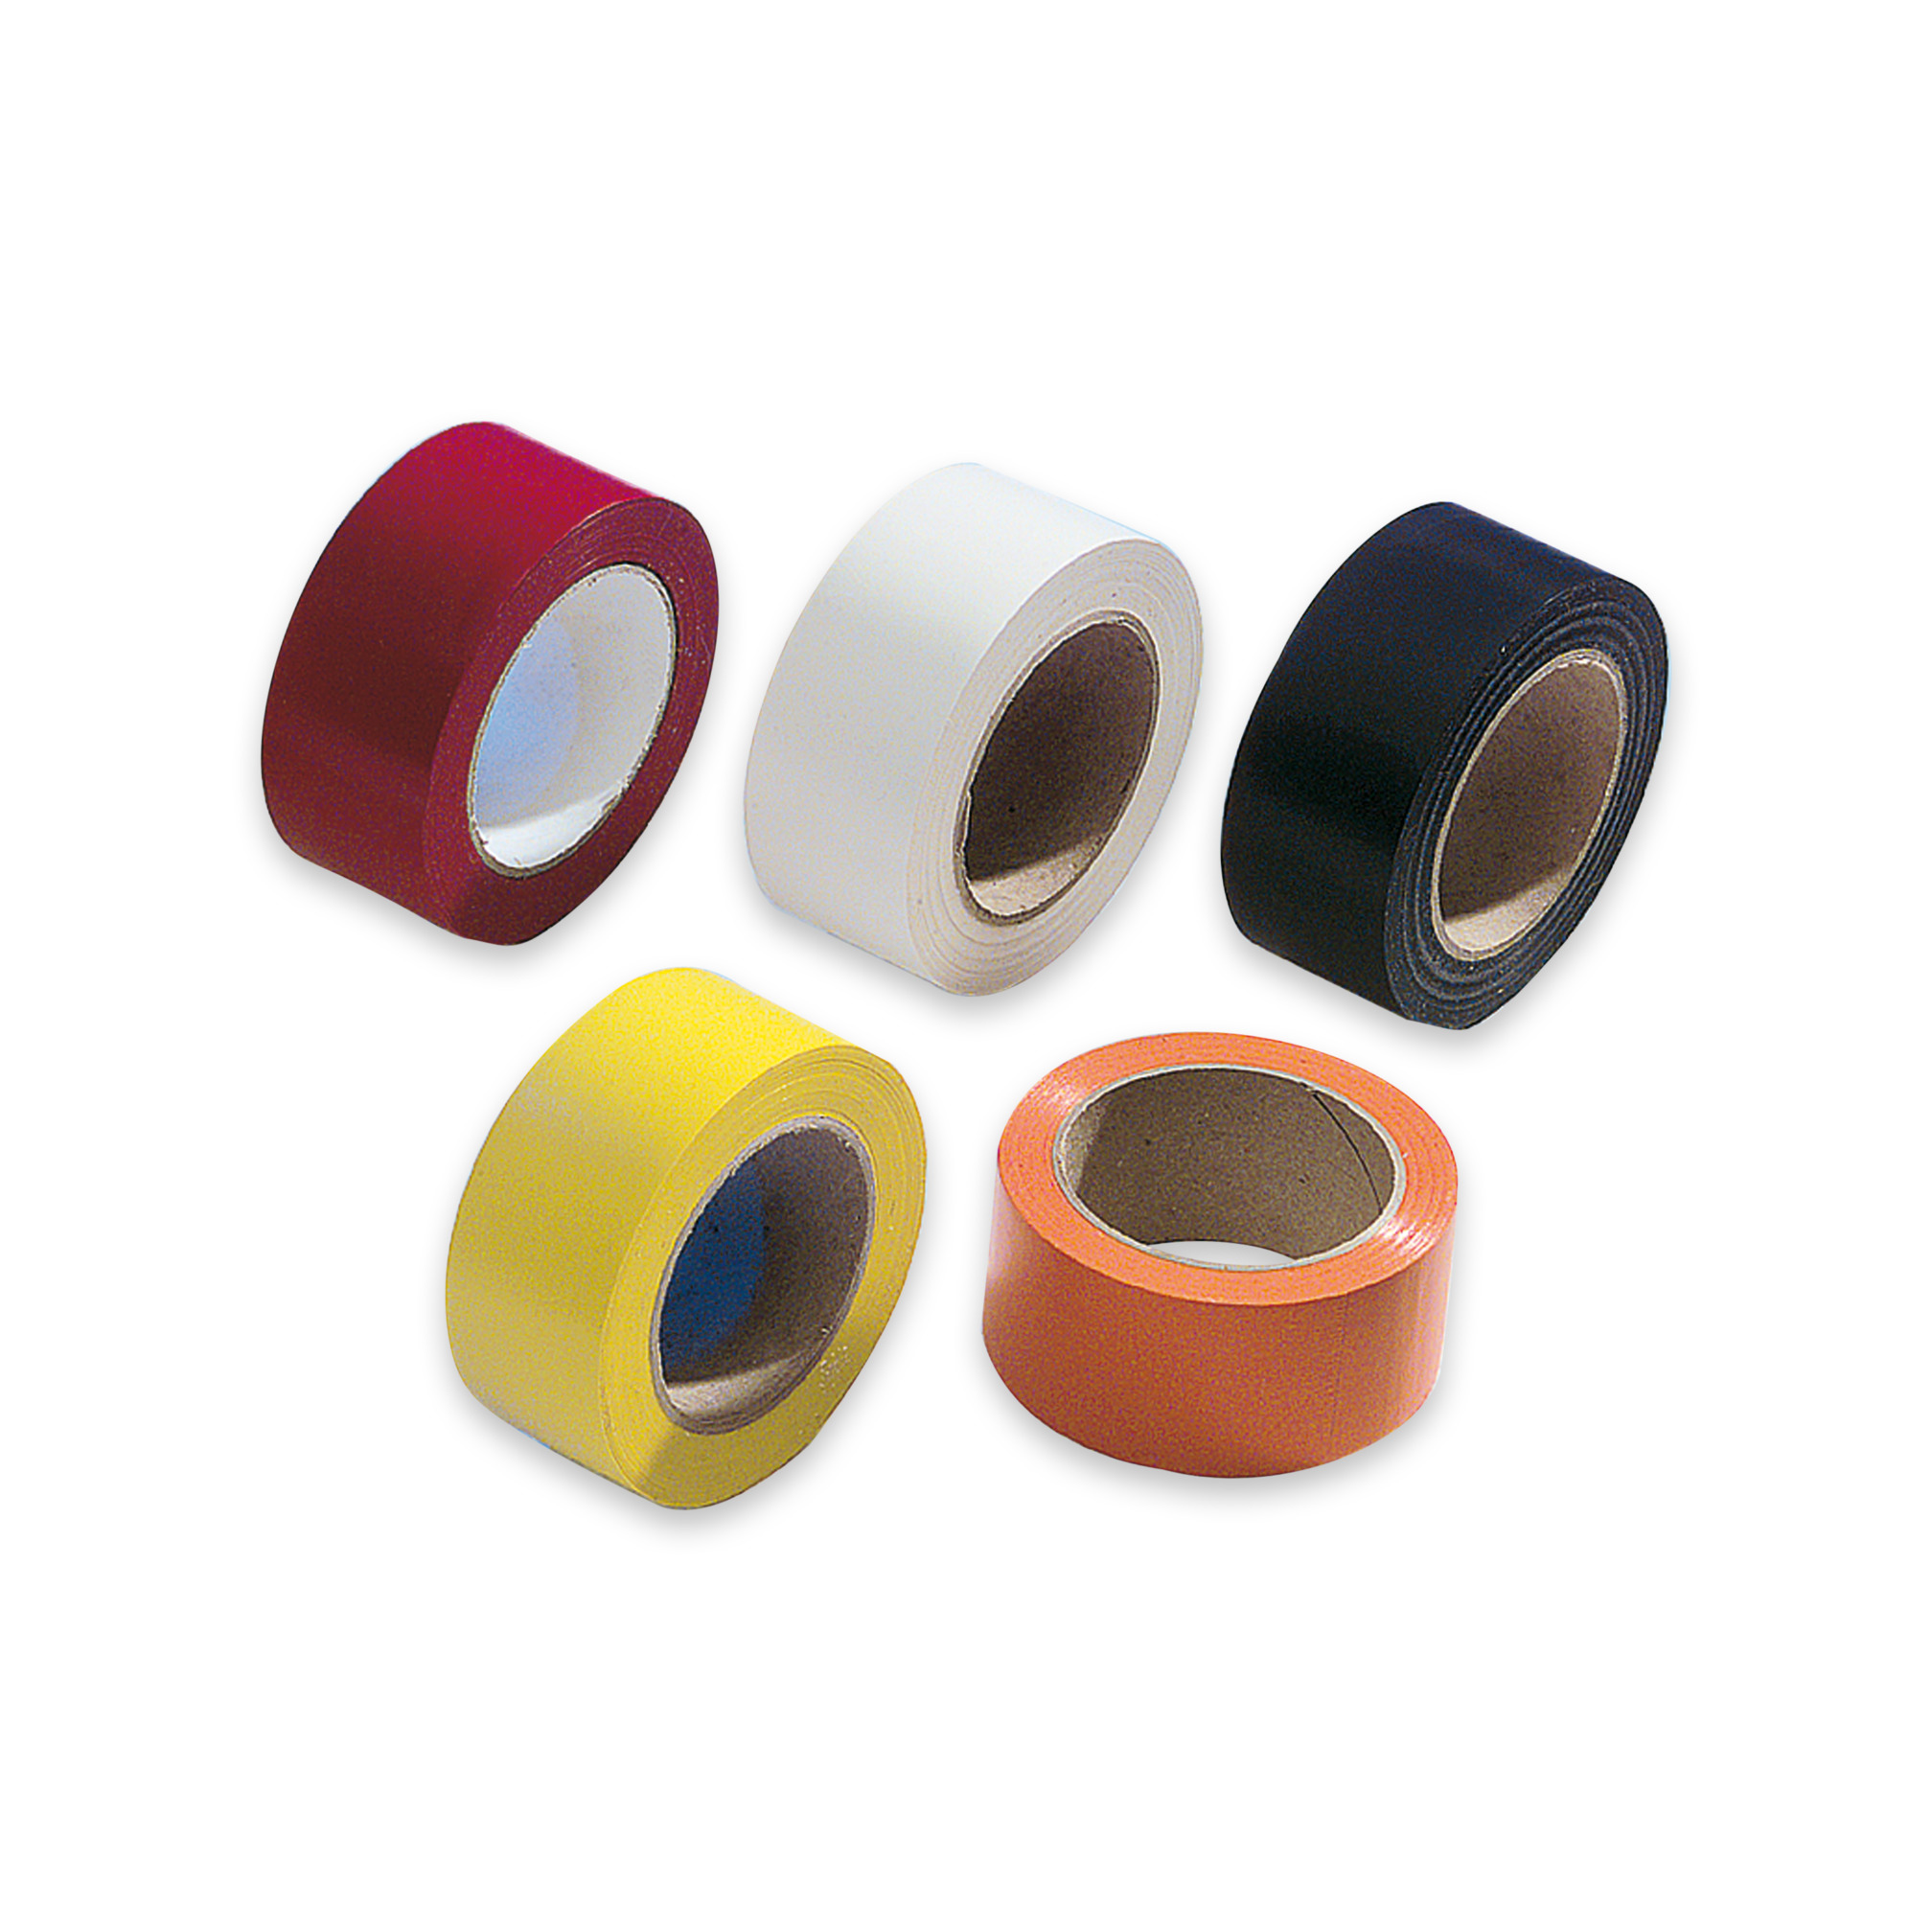 Marking tape, 50 mm, red